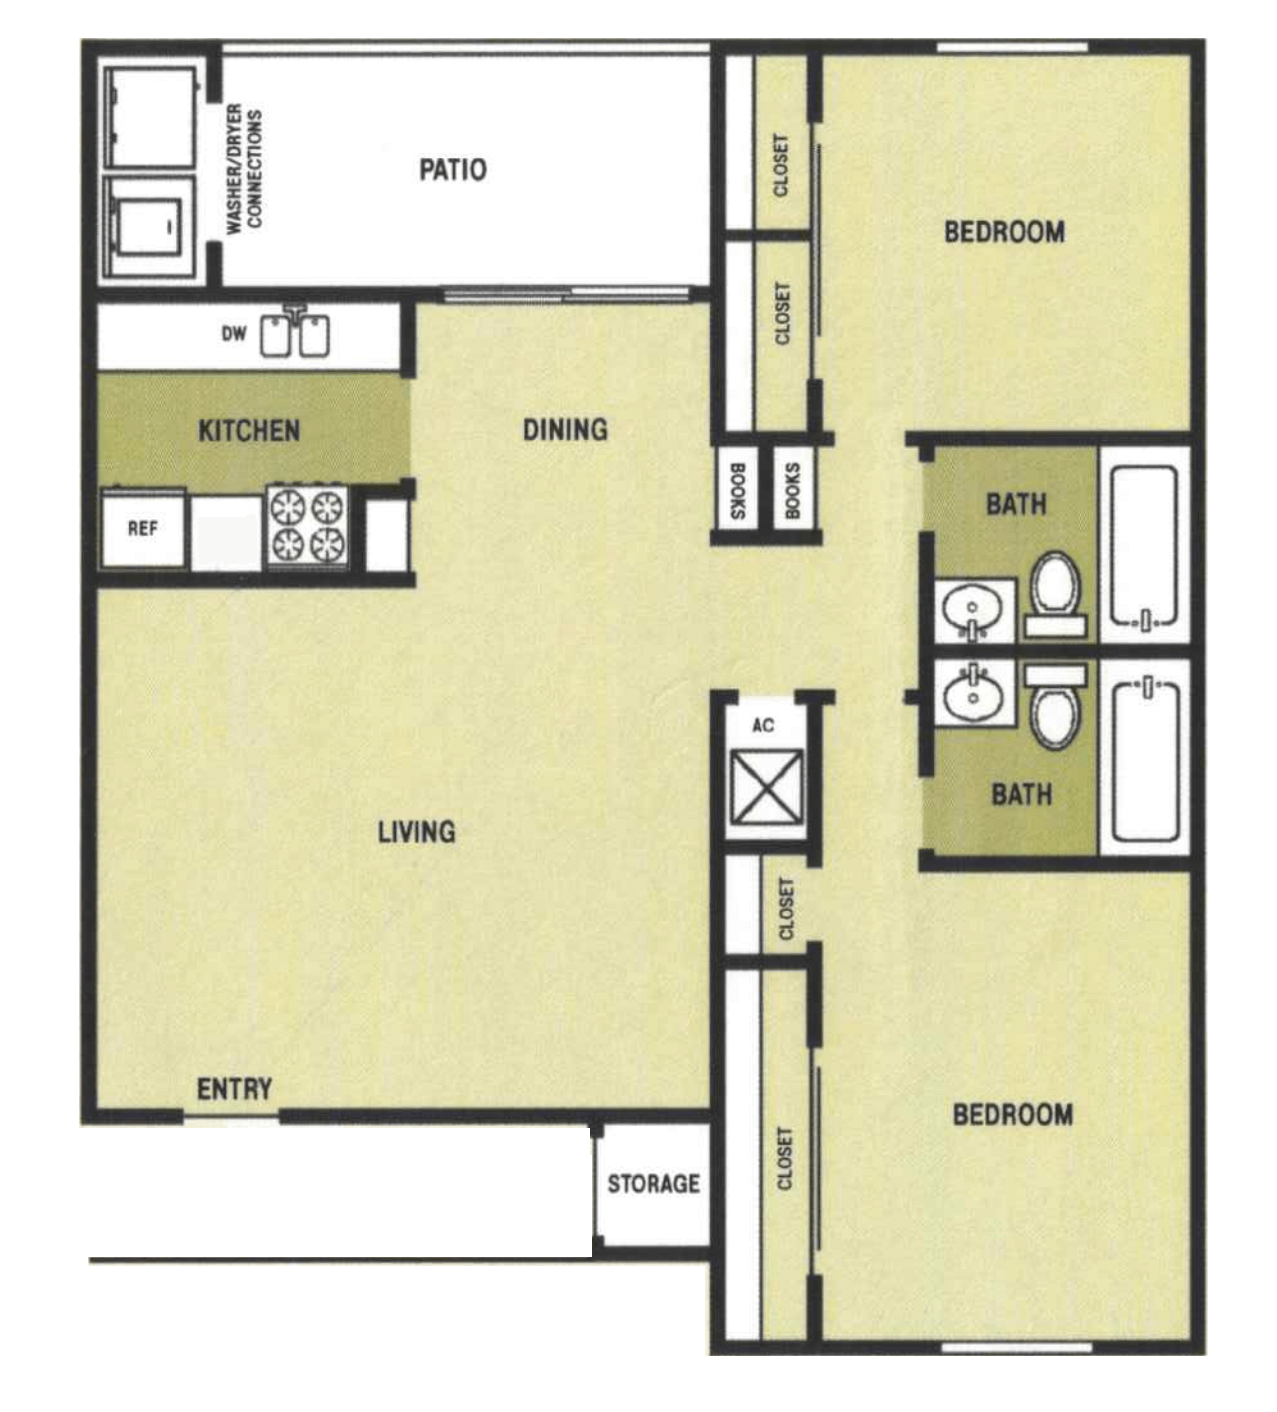 A 2×2 unit with 2 Bedrooms and 2 Bathrooms with area of 995 sq. ft